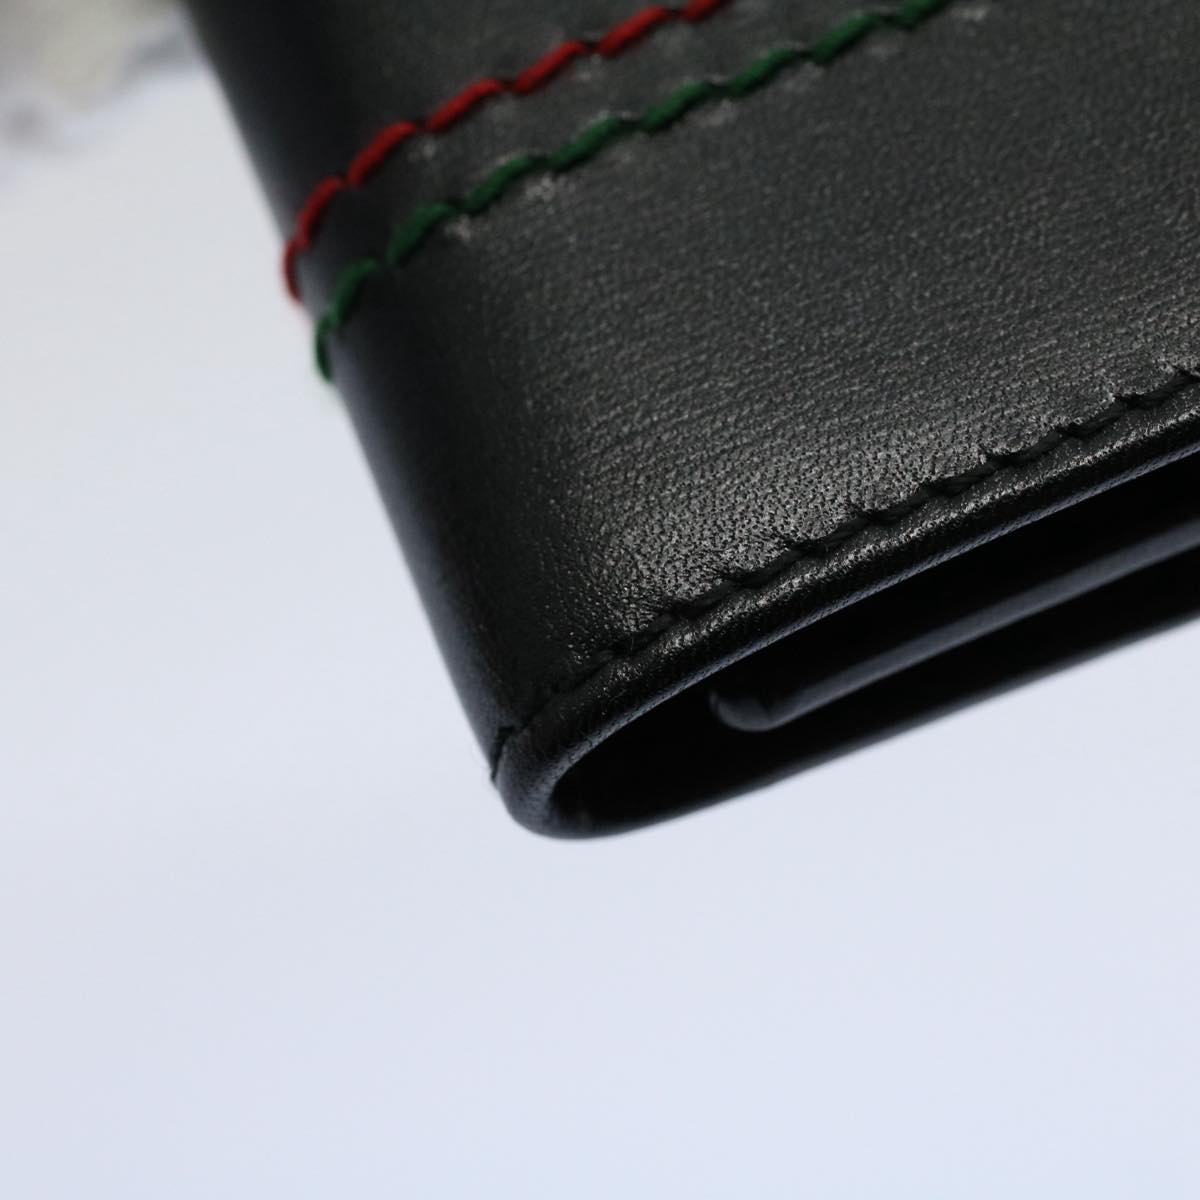 GUCCI Key Case Leather Black Red Green 138052 Auth am5177